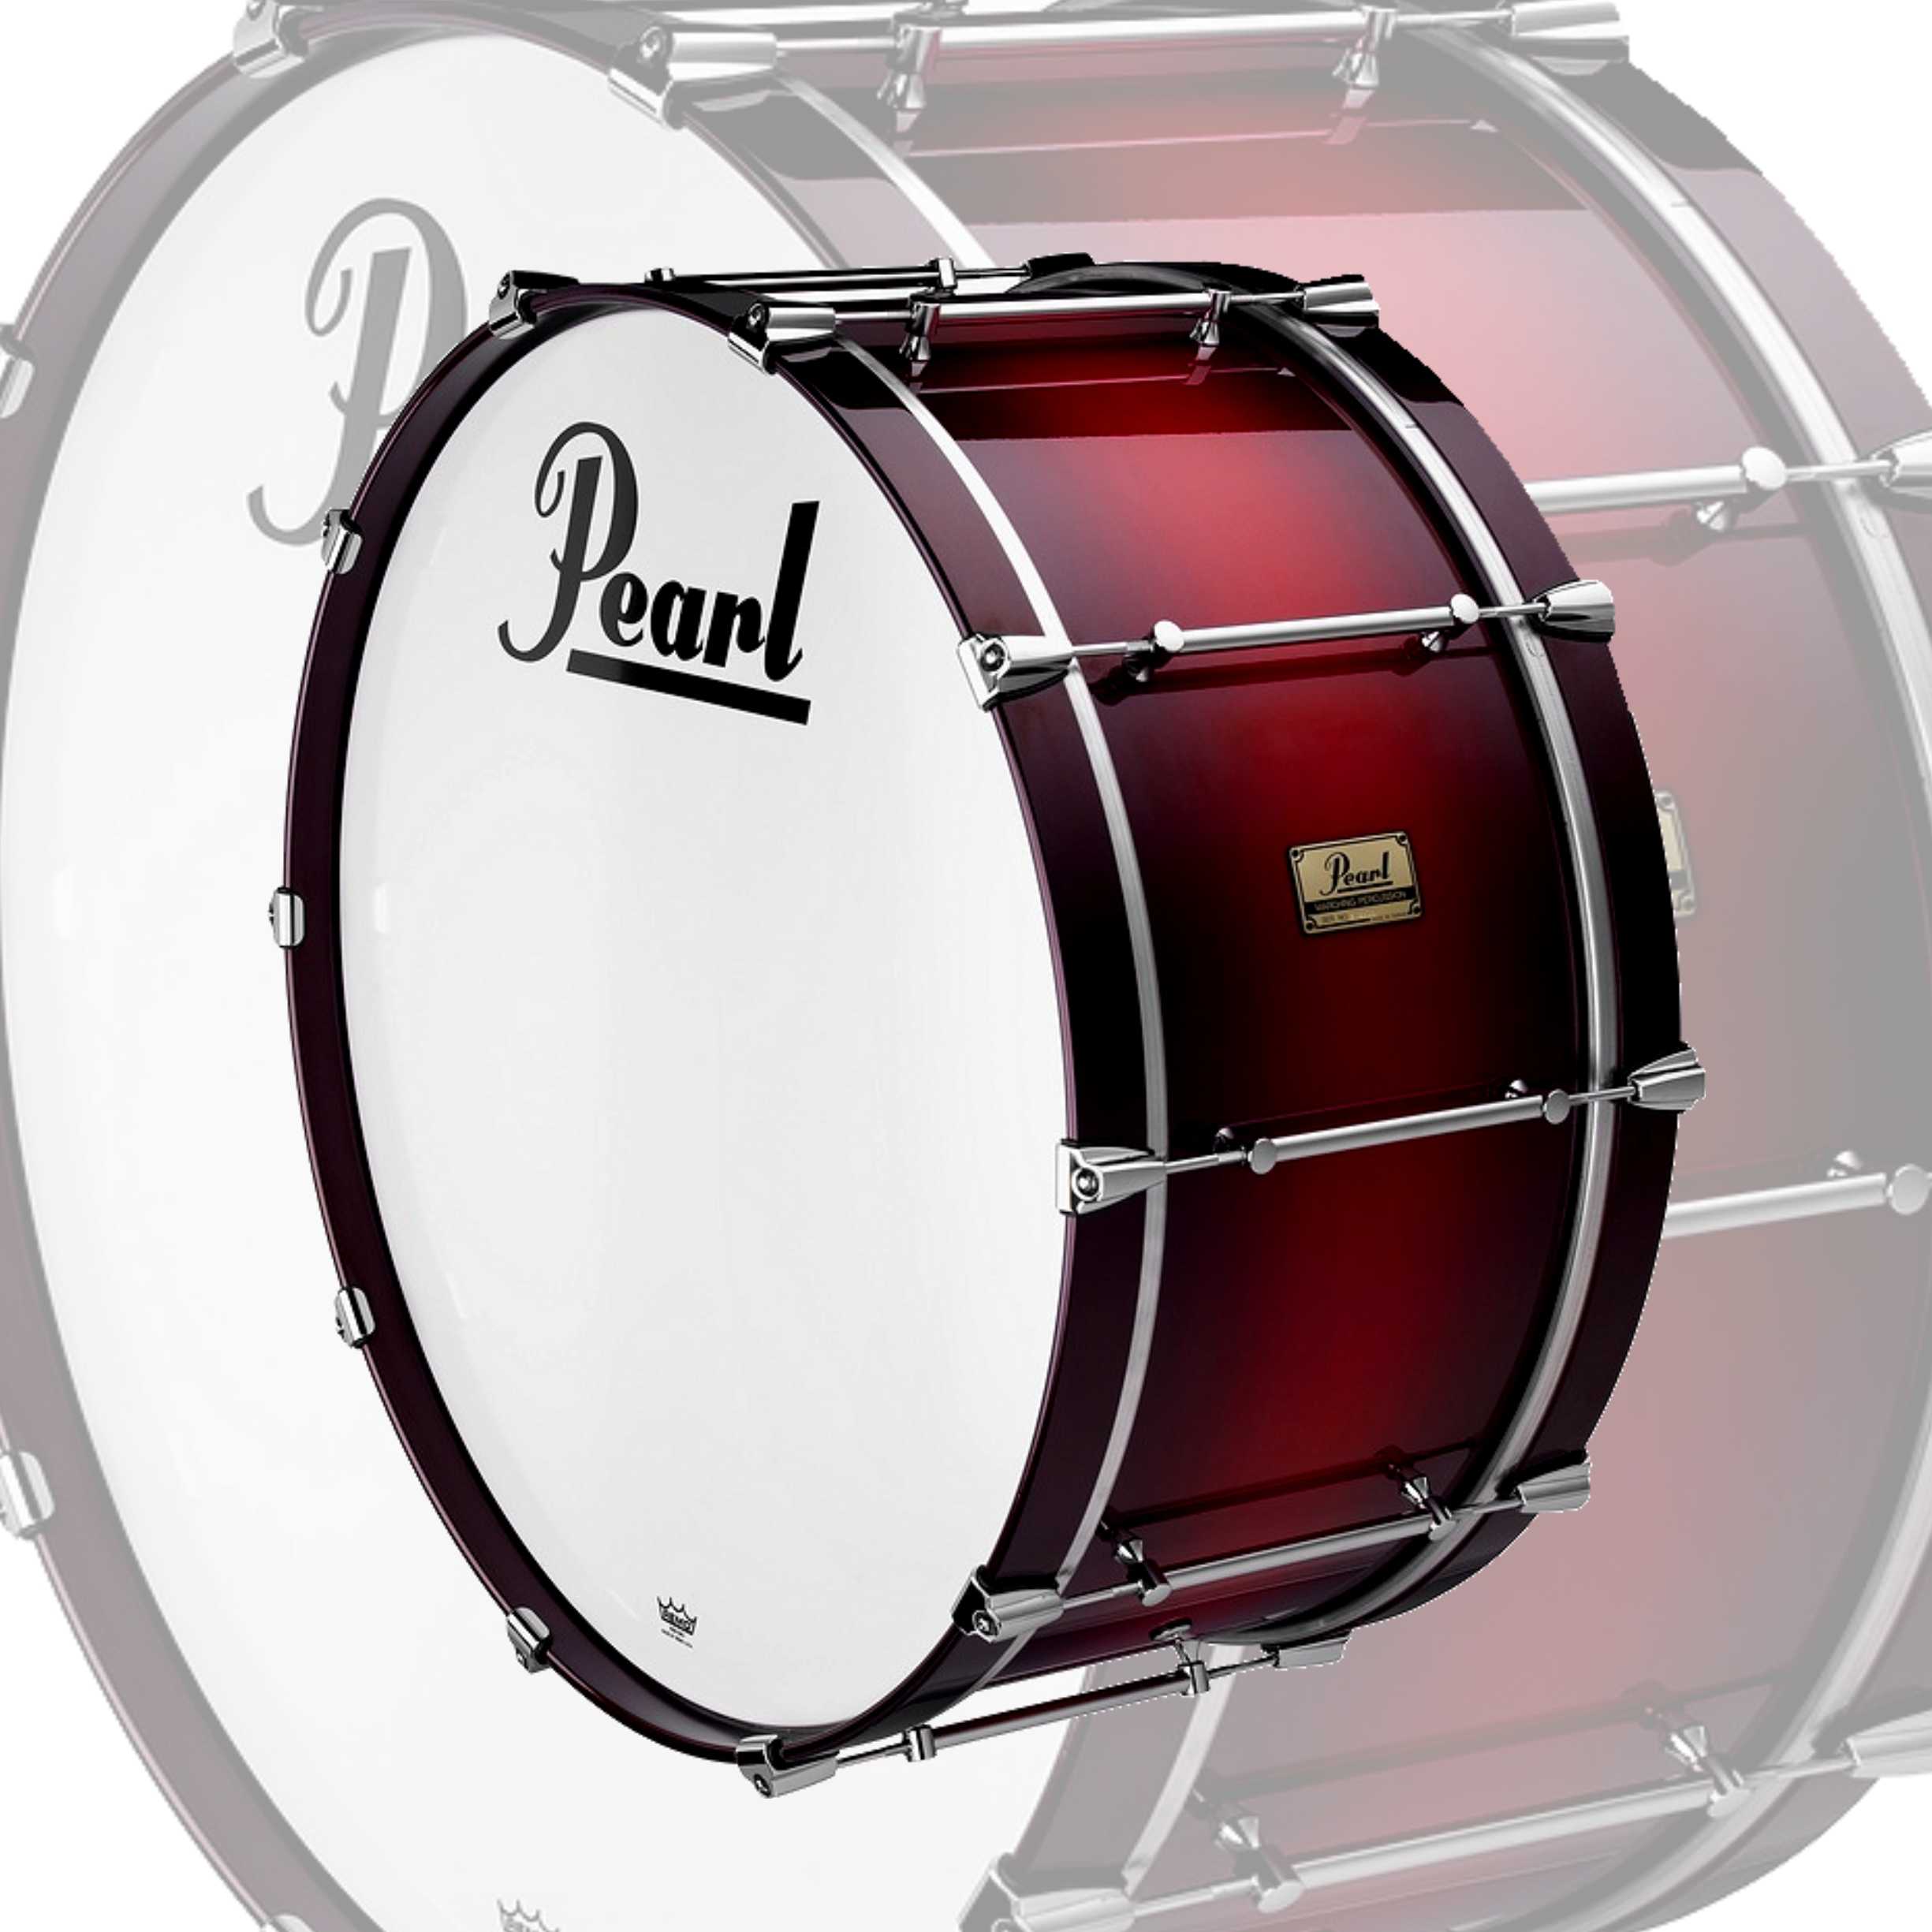 Pearl Pipe Band 26"x12" Marching Bass Drum